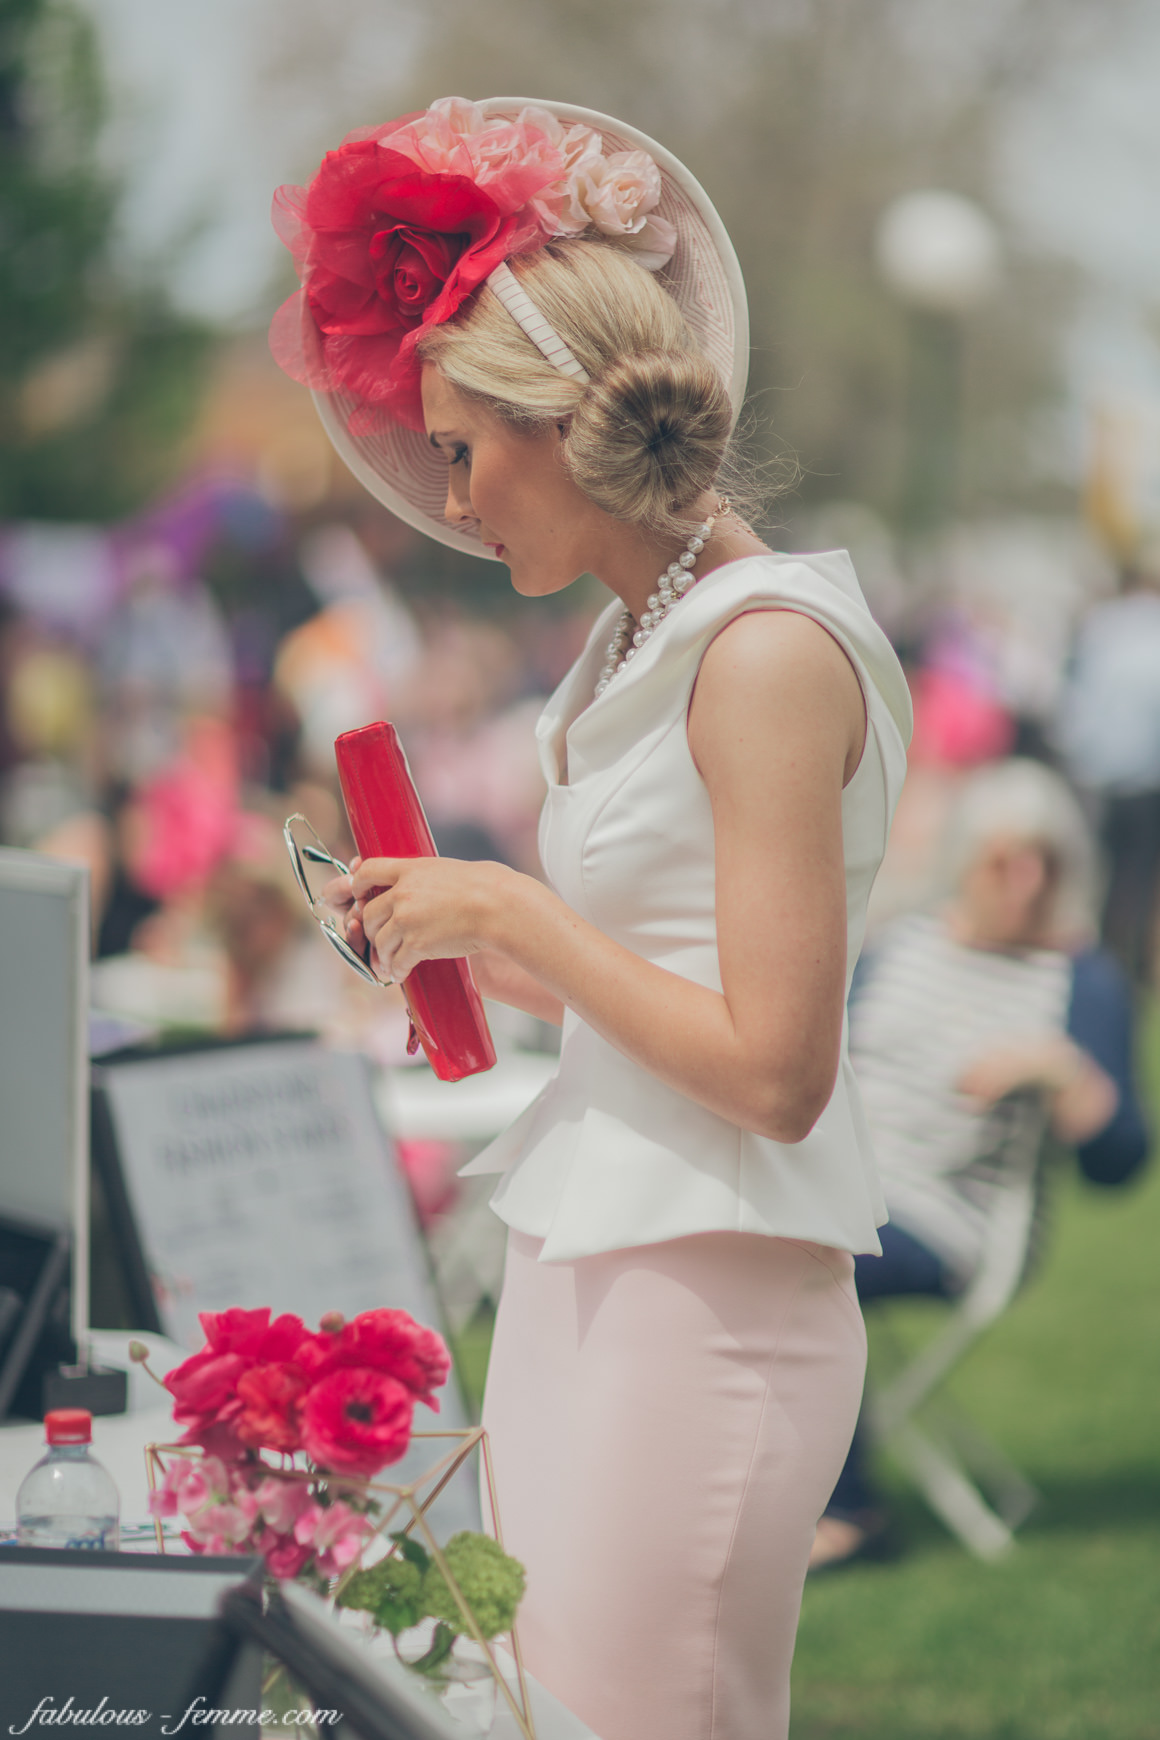 entering the fashions on the field in 2014 at Caulfield